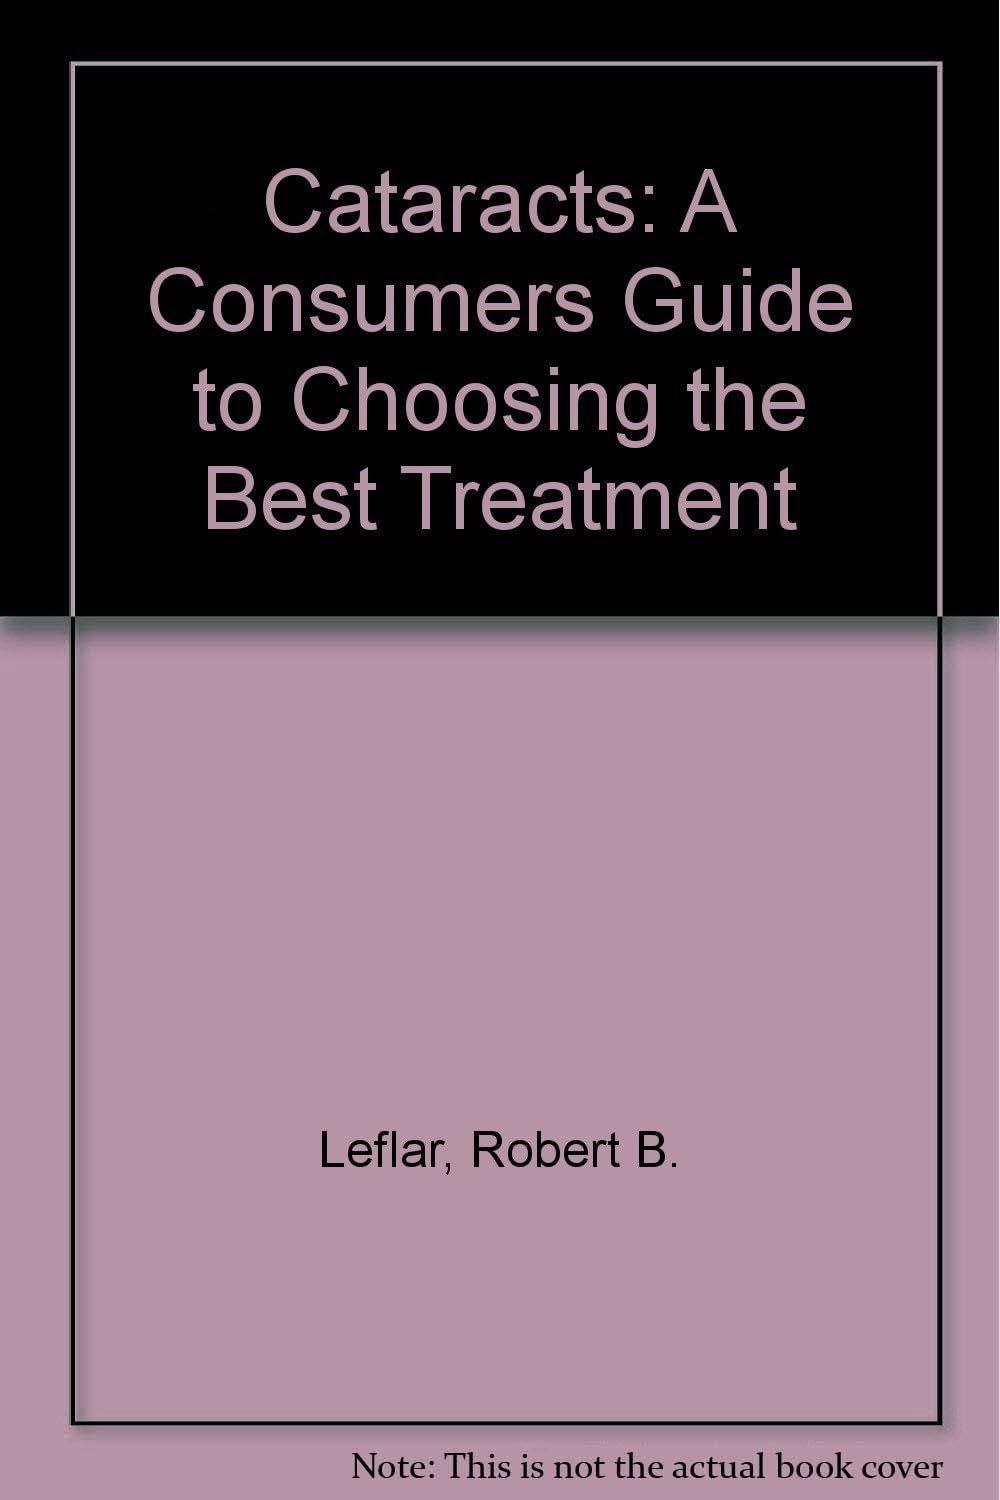 Cataracts: A Consumers Guide to Choosing the Best Treatment